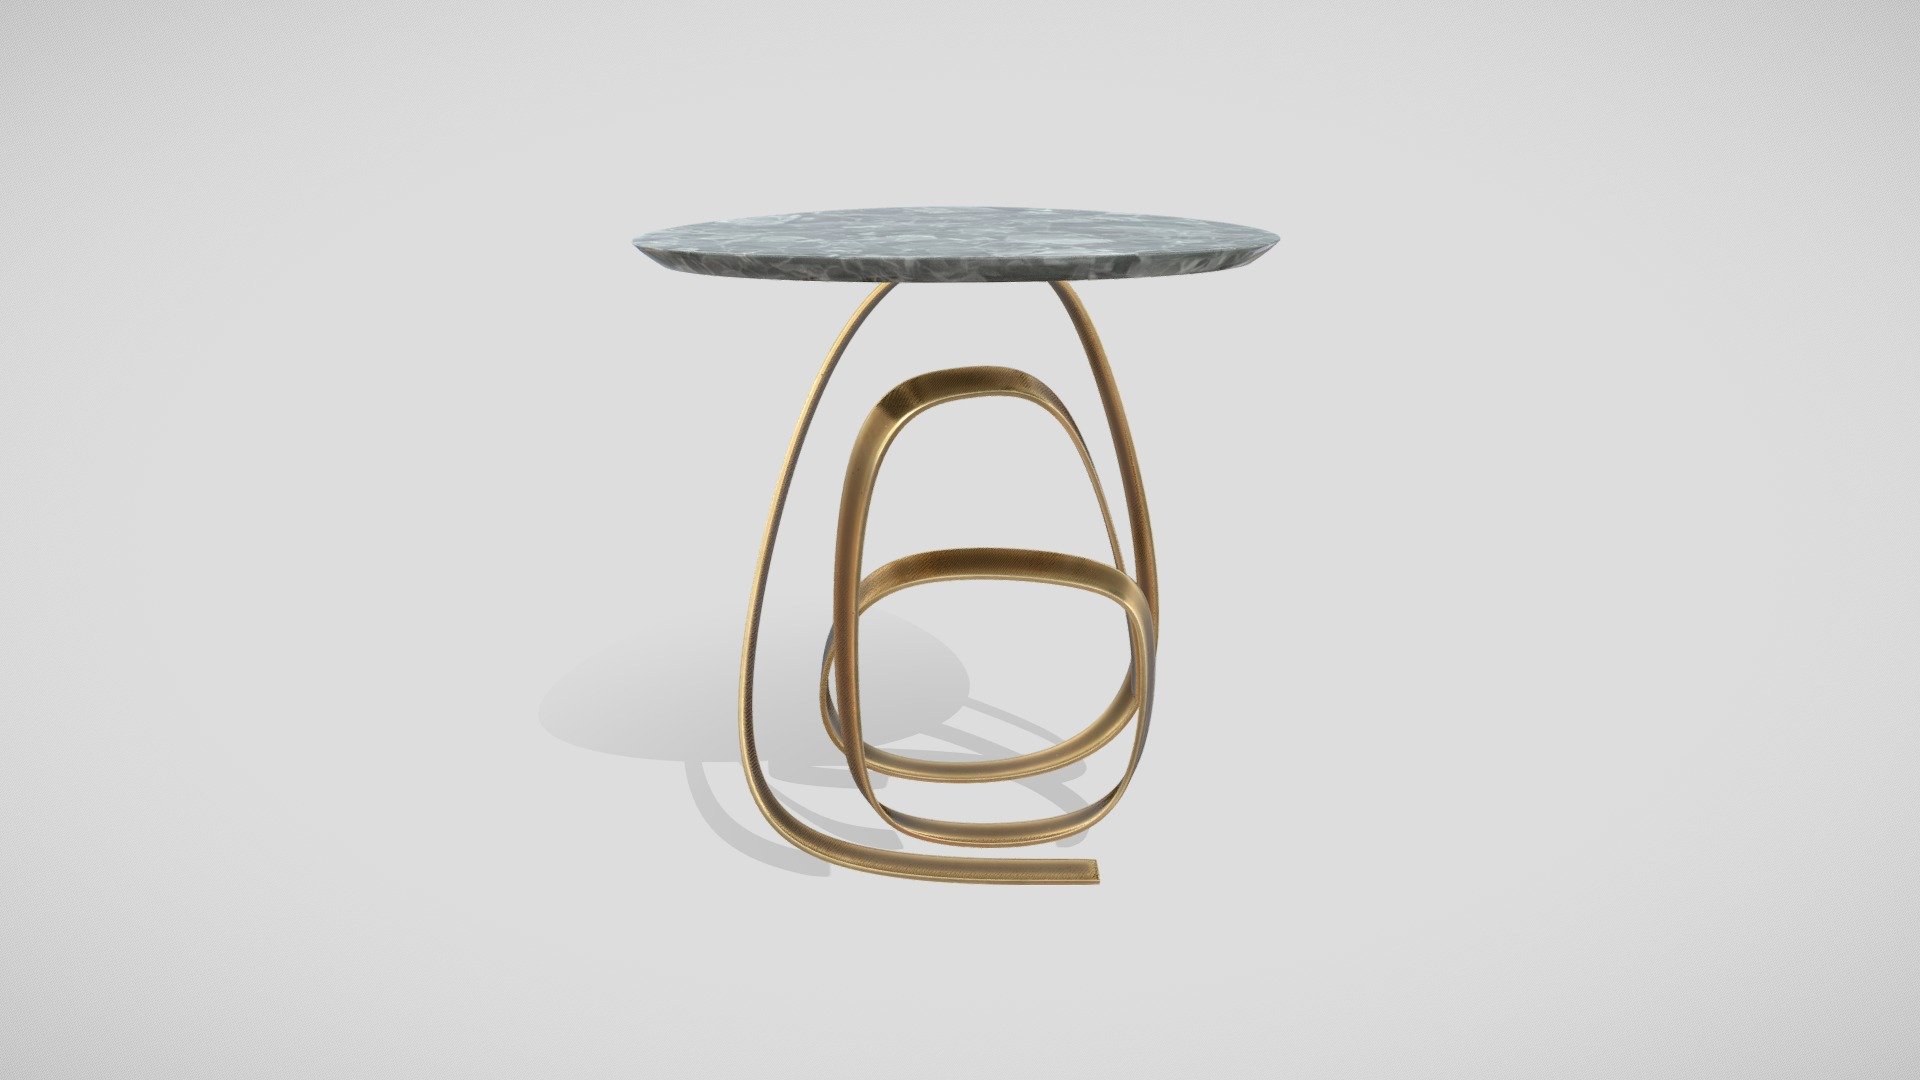 Brass Marble Side Table

Finishes: Brass, Marble

Dimensions: 62 x 63 x H 69 cm

Unwrapped, no overlapping.

Textures: 8K - Brass Marble Side Table - 3D model by gogoskilla 3d model